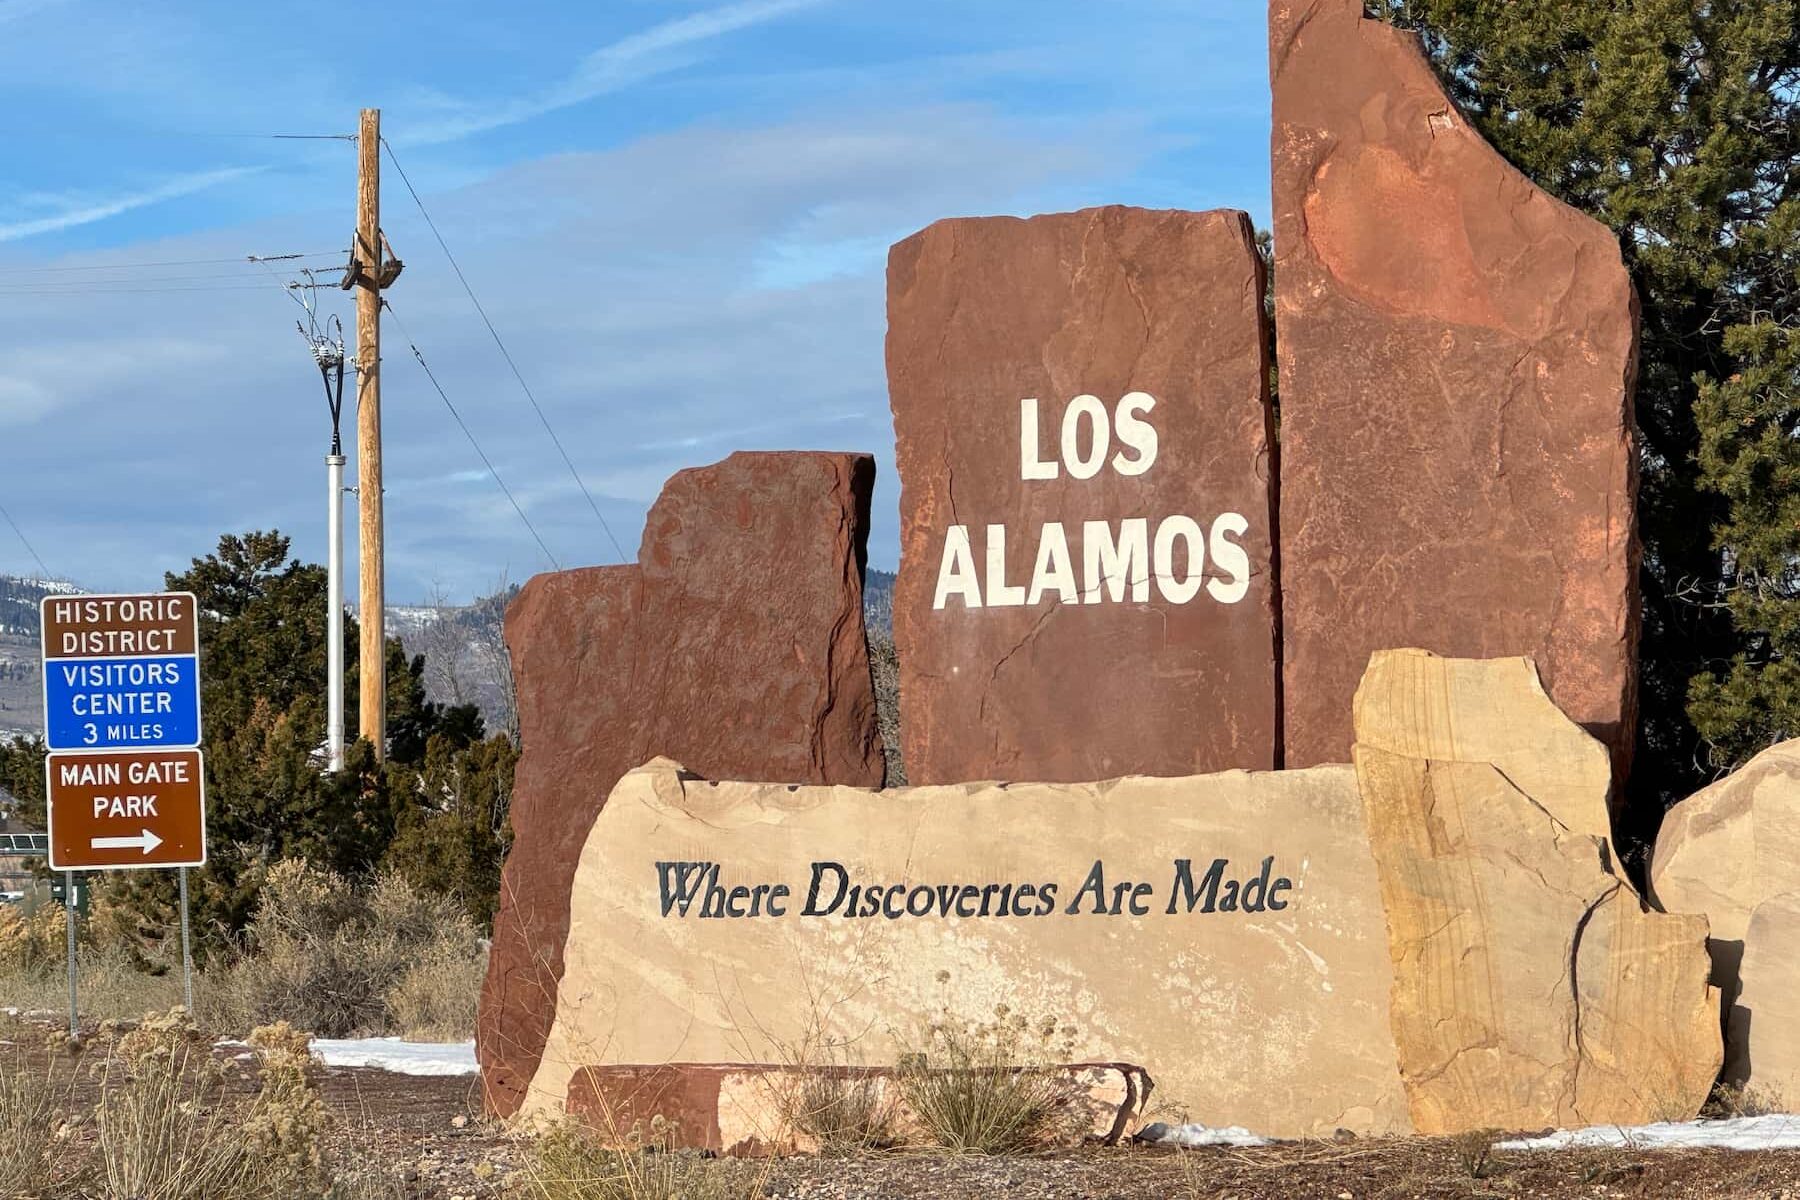 Welcome to Los Alamos. Photo by Debbie Stone